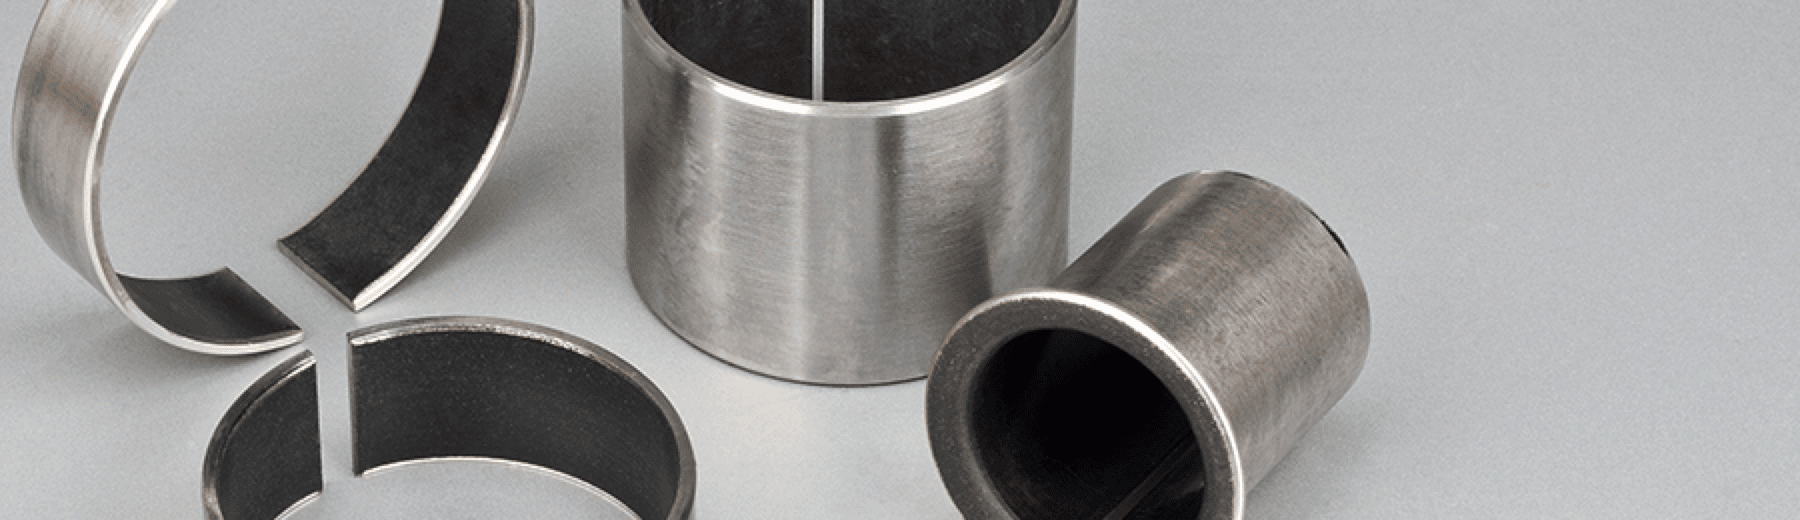 stainless steel (aisi 304) bushing with teflon in the internal surface.